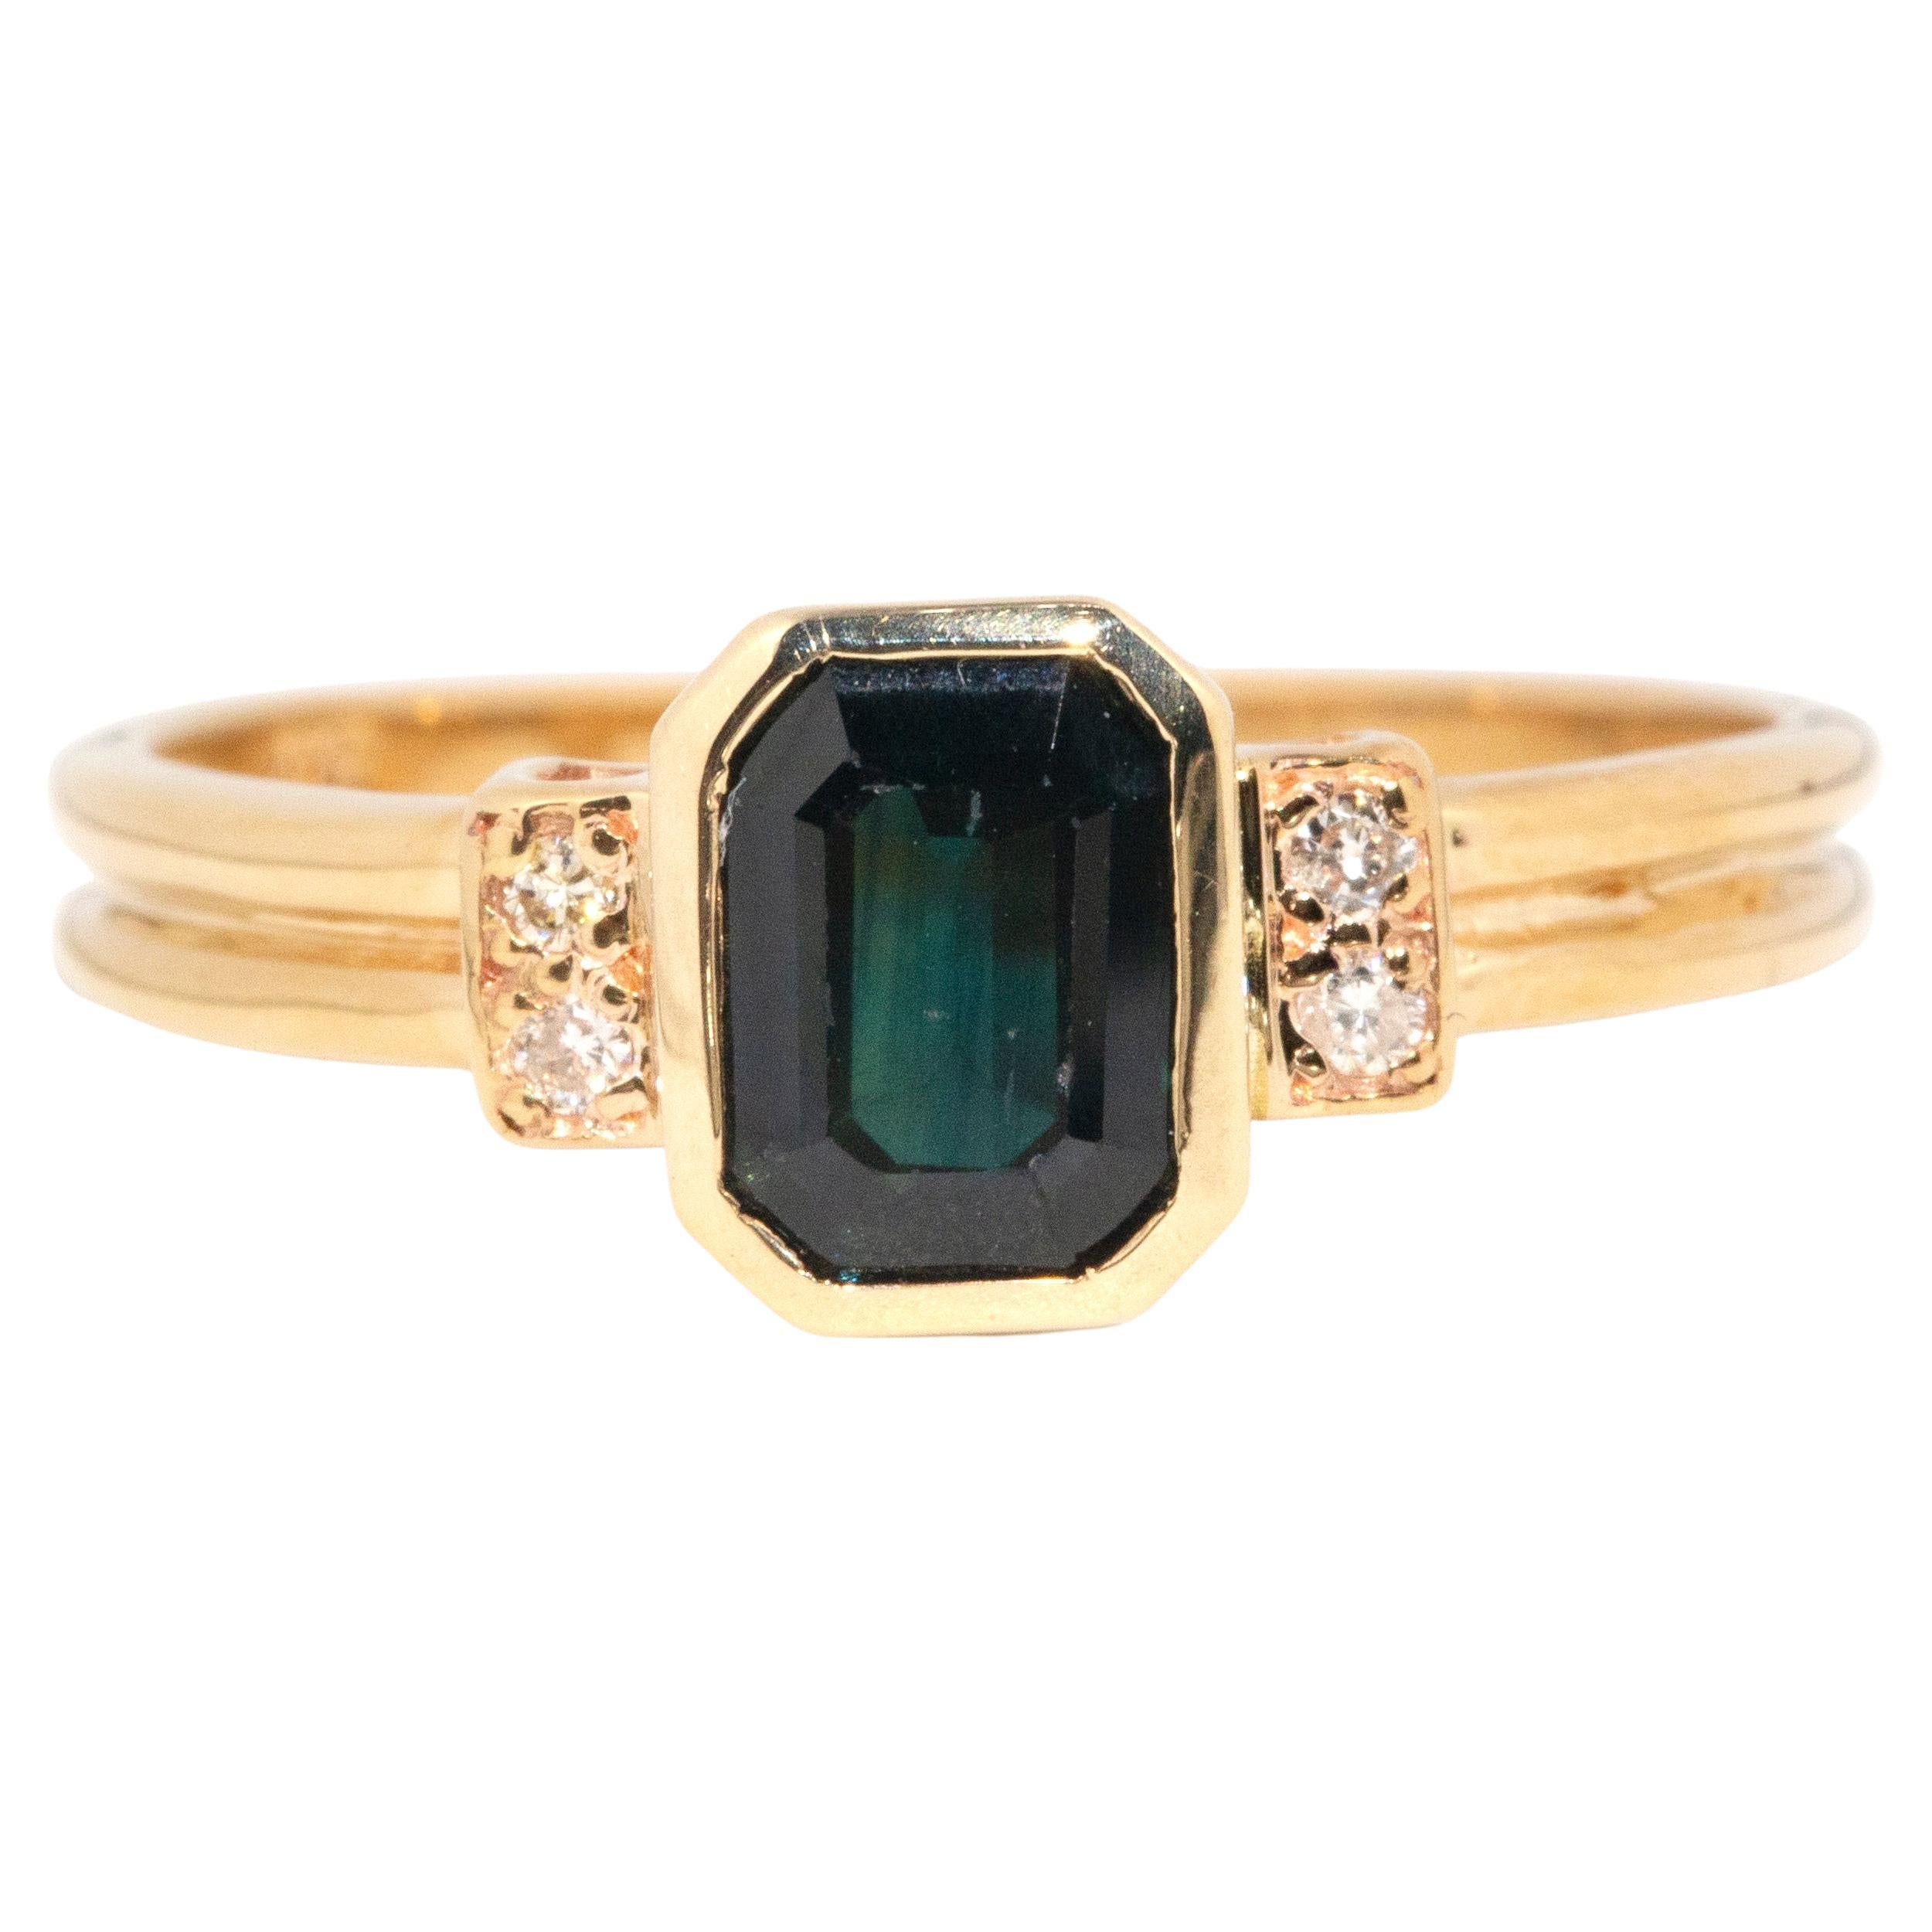 Vintage 1990s 9 Carat Yellow Gold Emerald Cut Teal Sapphire and Diamond Ring